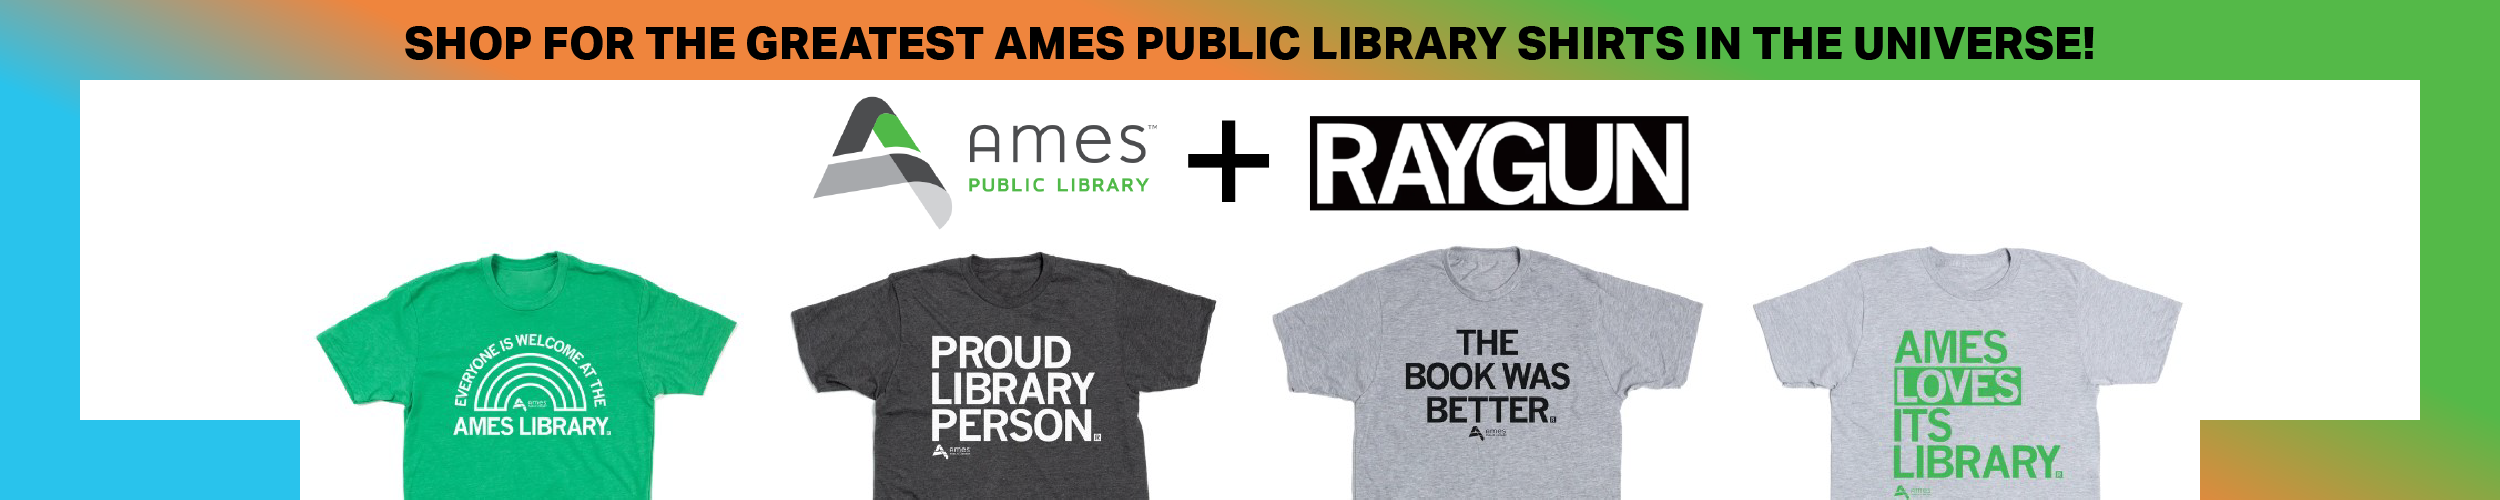 Shop for the greatest Ames Public Library shirts in the universe: Ames Public Library + RAYGUN